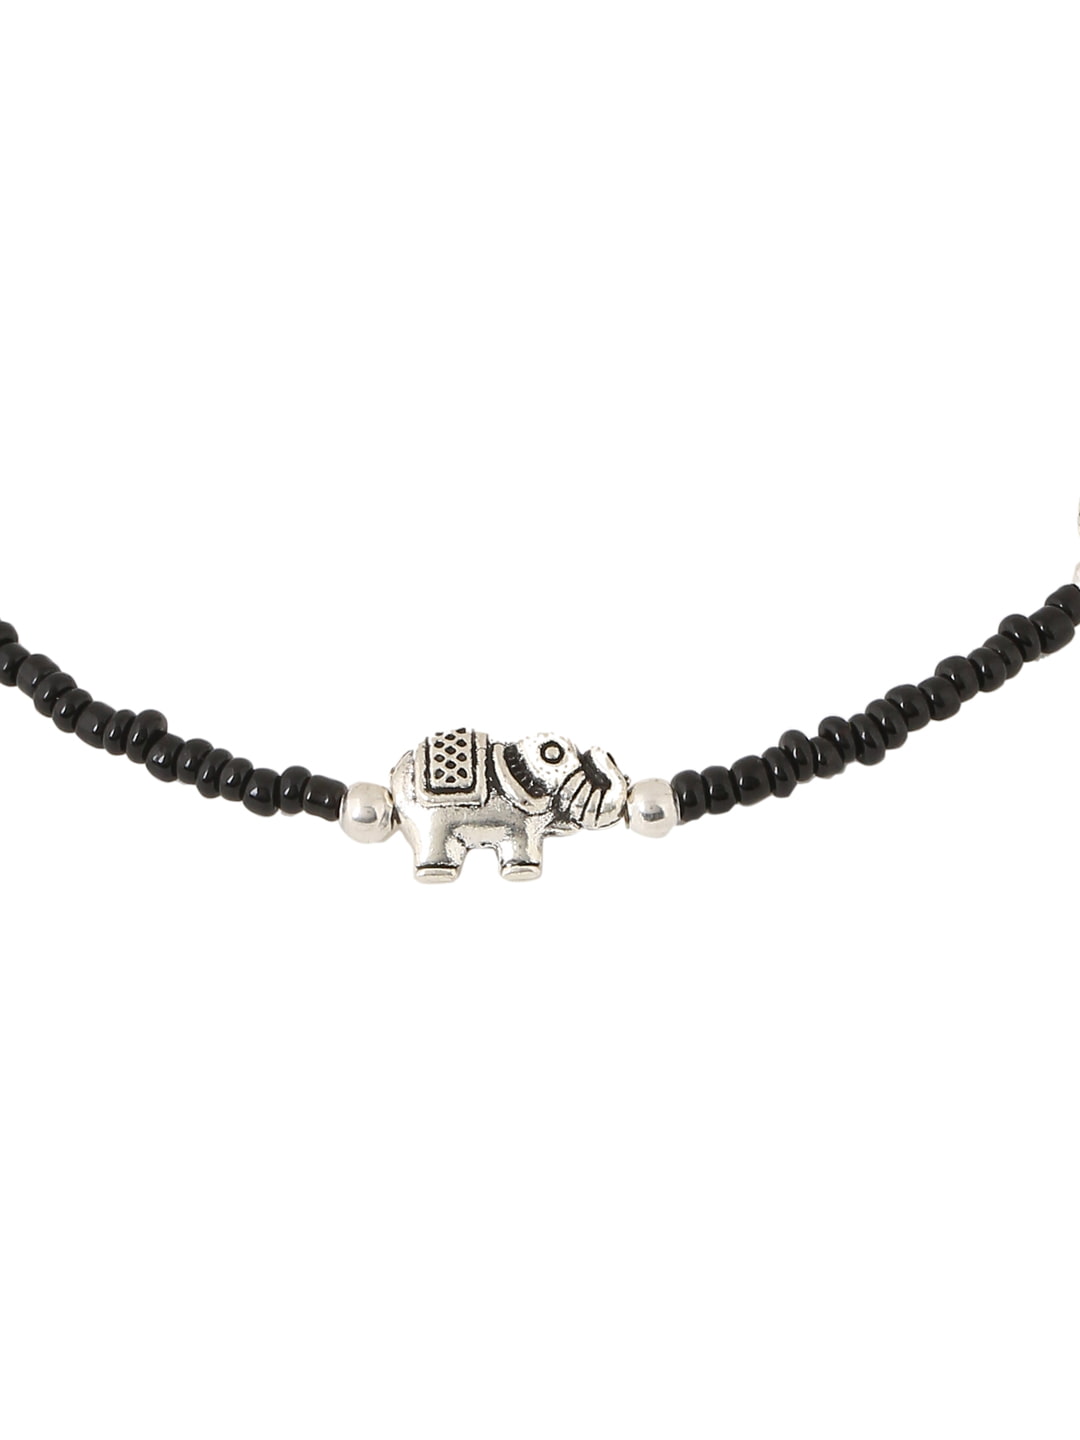 elephant-shape-anklet-with-black-beads-viraasi